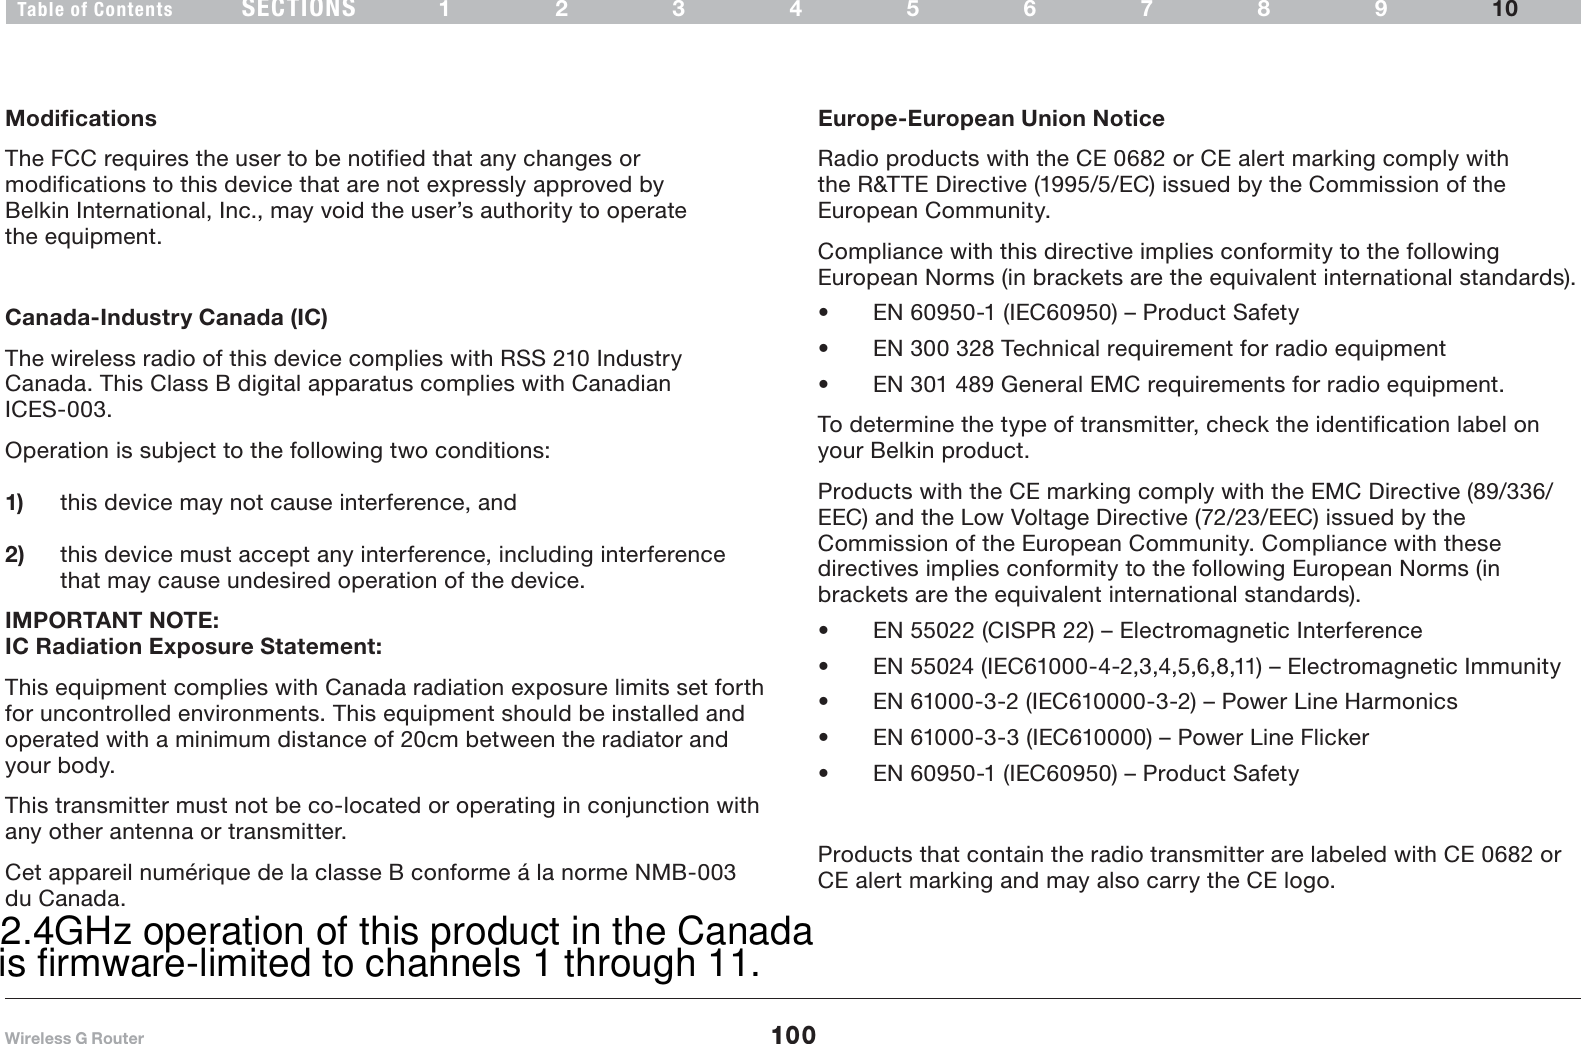 100SECTIONSTable of Contents 12345678910INFORMATIONModifications The FCC requires the user to be notified that any changes or modifications to this device that are not expressly approved by Belkin International, Inc., may void the user’s authority to operate the equipment.Canada-Industry Canada (IC)The wireless radio of this device complies with RSS 210 Industry Canada. This Class B digital apparatus complies with Canadian ICES-003.Operation is subject to the following two conditions:1) this device may not cause interference, and2) this device must accept any interference, including interference that may cause undesired operation of the device.IMPORTANT NOTE:IC Radiation Exposure Statement:This equipment complies with Canada radiation exposure limits set forth for uncontrolled environments. This equipment should be installed and operated with a minimum distance of 20cm between the radiator and your body.any other antenna or transmitter.Cet appareil numérique de la classe B conforme á la norme NMB-003 Europe-European Union Notice Radio products with the CE 0682 or CE alert marking comply with the R&amp;TTE Directive (1995/5/EC) issued by the Commission of the European Community.Compliance with this directive implies conformity to the following European Norms (in brackets are the equivalent international standards).Ř EN 60950-1 (IEC60950) – Product Safety Ř EN 300 328 Technical requirement for radio equipment Ř EN 301 489 General EMC requirements for radio equipment.To determine the type of transmitter, check the identification label on your Belkin product.Products with the CE marking comply with the EMC Directive (89/336/EEC) and the Low Voltage Directive (72/23/EEC) issued by the Commission of the European Community. Compliance with these directives implies conformity to the following European Norms (in brackets are the equivalent international standards).Ř EN 55022 (CISPR 22) – Electromagnetic Interference Ř EN 55024 (IEC61000-4-2,3,4,5,6,8,11) – Electromagnetic Immunity Ř EN 61000-3-2 (IEC610000-3-2) – Power Line Harmonics Ř EN 61000-3-3 (IEC610000) – Power Line Flicker Ř EN 60950-1 (IEC60950) – Product SafetyProducts that contain the radio transmitter are labeled with CE 0682 or CE alert marking and may also carry the CE logo.This transmitter must not be co-located or operating in conjunction withdu Canada.2.4GHz operation of this product in the CanadaWireless G Routeris firmware-limited to channels 1 through 11.